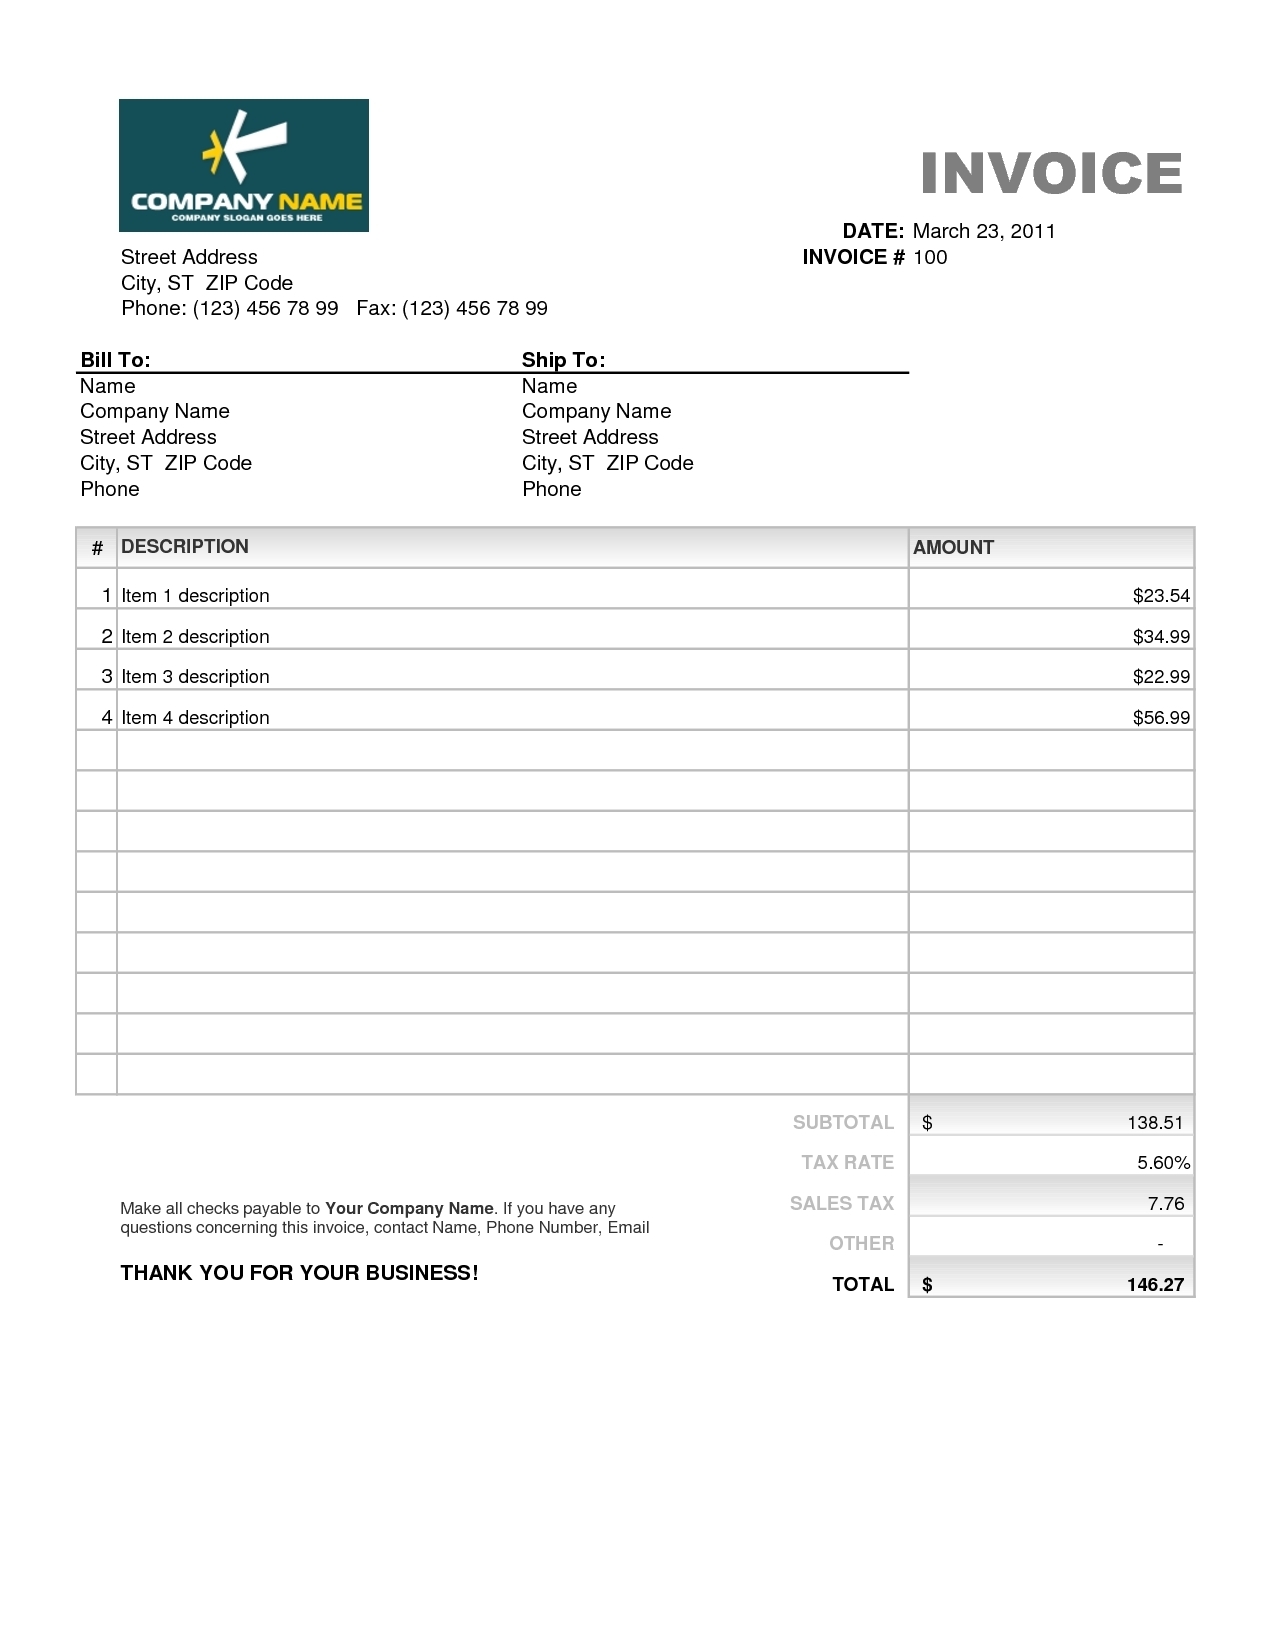 invoice excel template free download invoice template free 2016 sample invoices excel